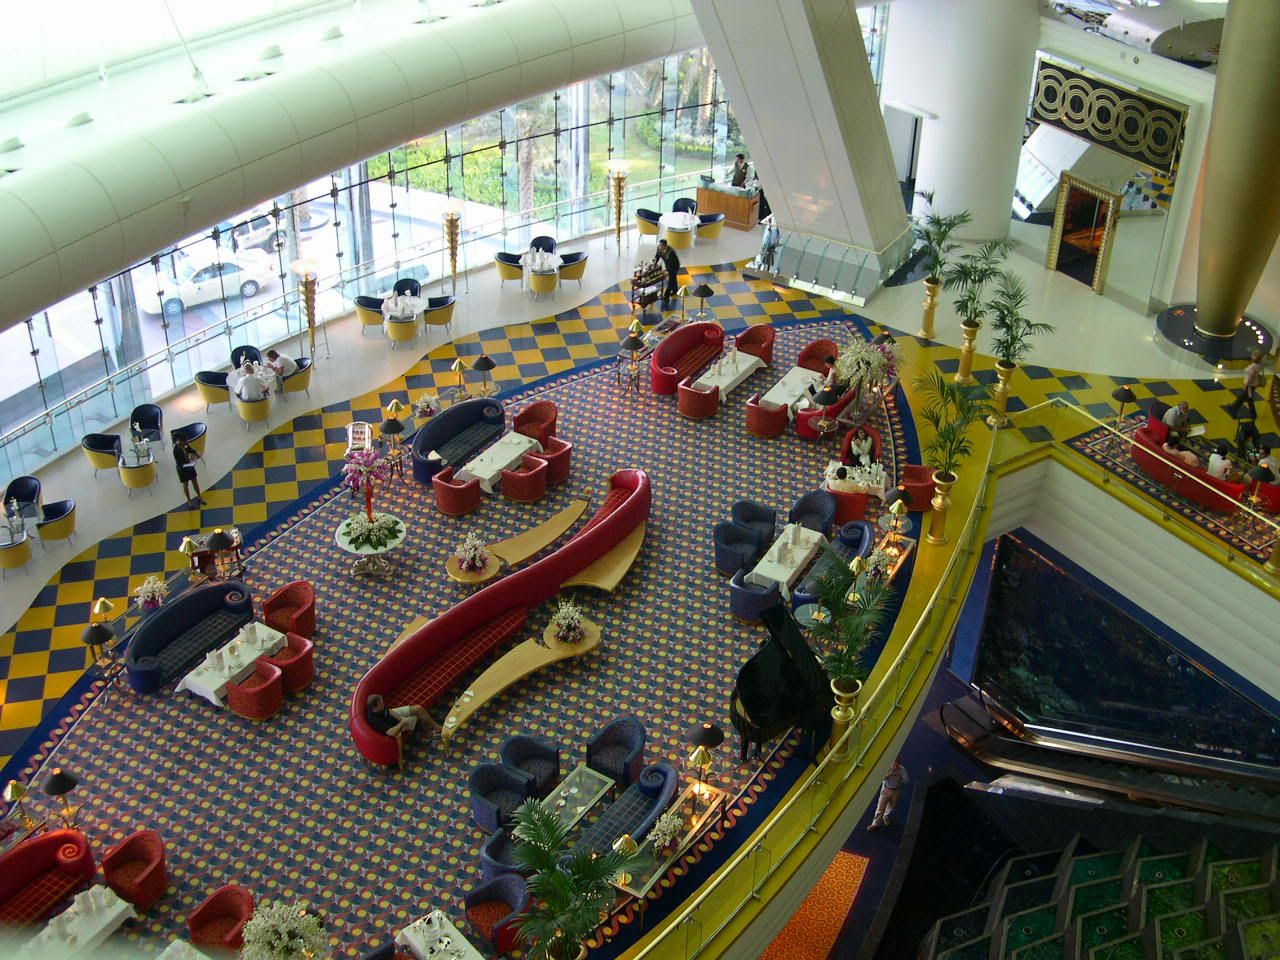 Burj_al-arab_indoor.jpg Burj_al-arab_indoor.jpg image by Robin882